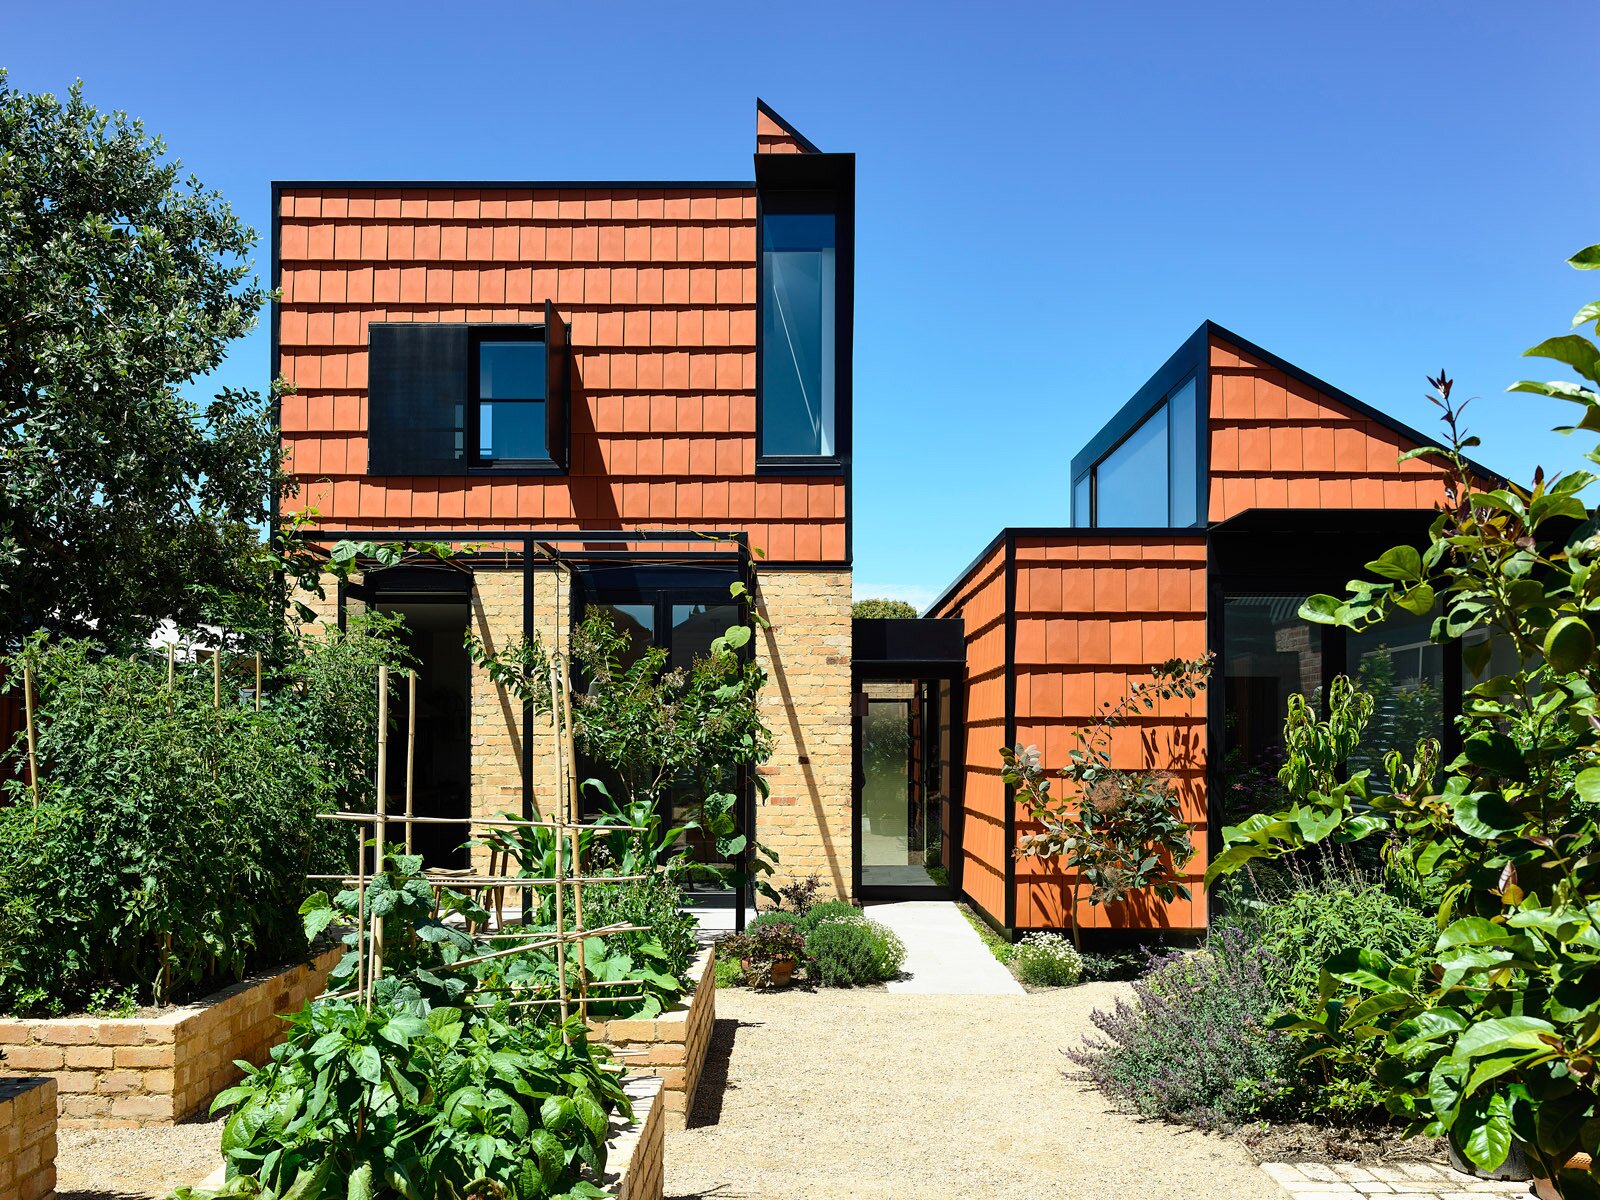 A Multigenerational Home Complete With Vegetable Gardens Rises in Central Melbourne